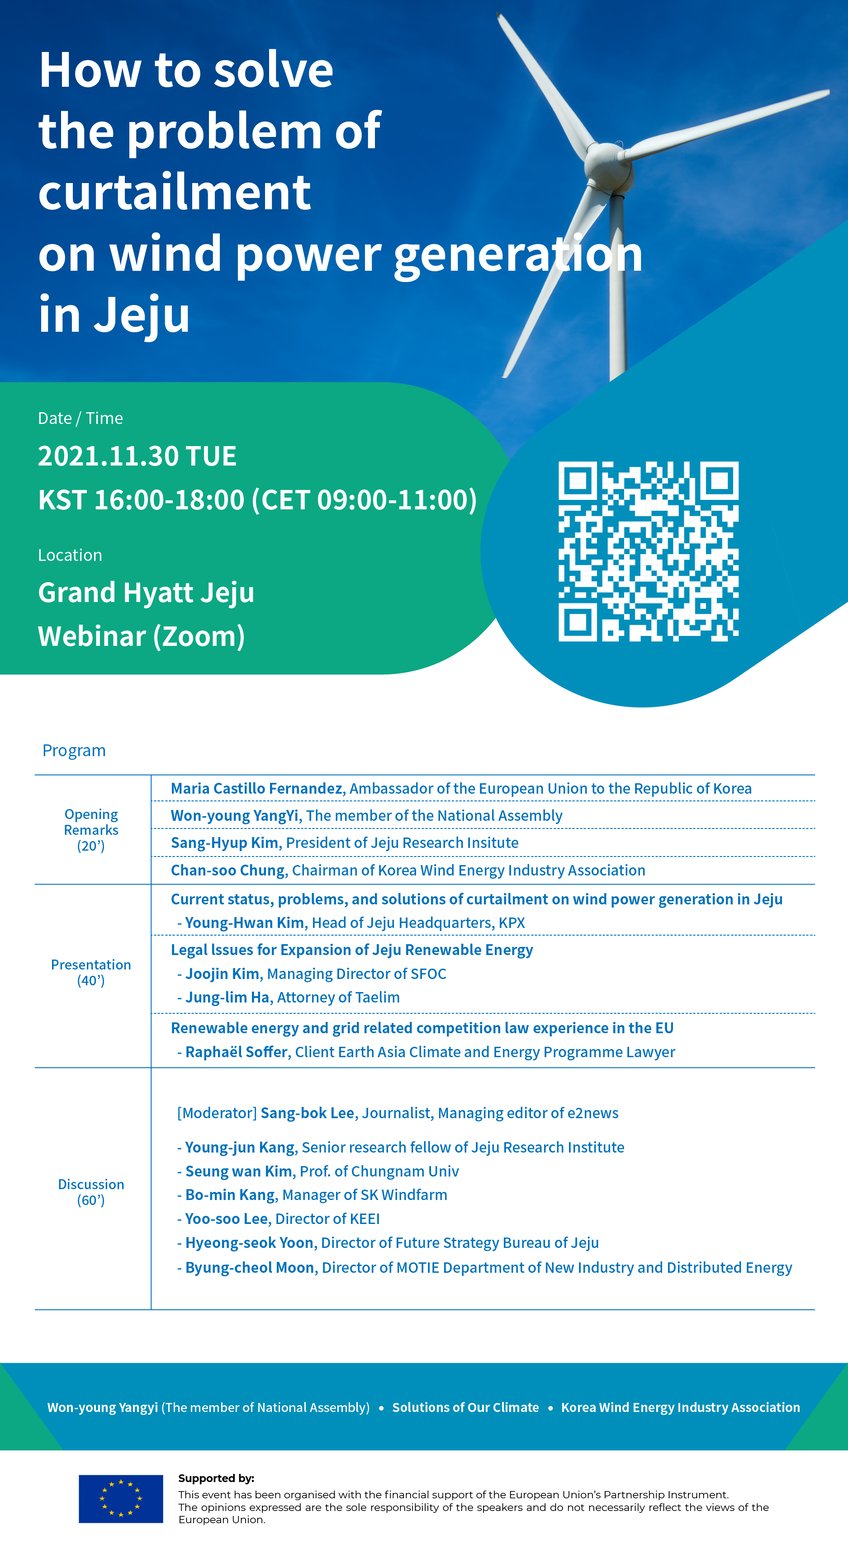 [Webinar] How to solve the problem of curtailment on wind power generation in Jeju